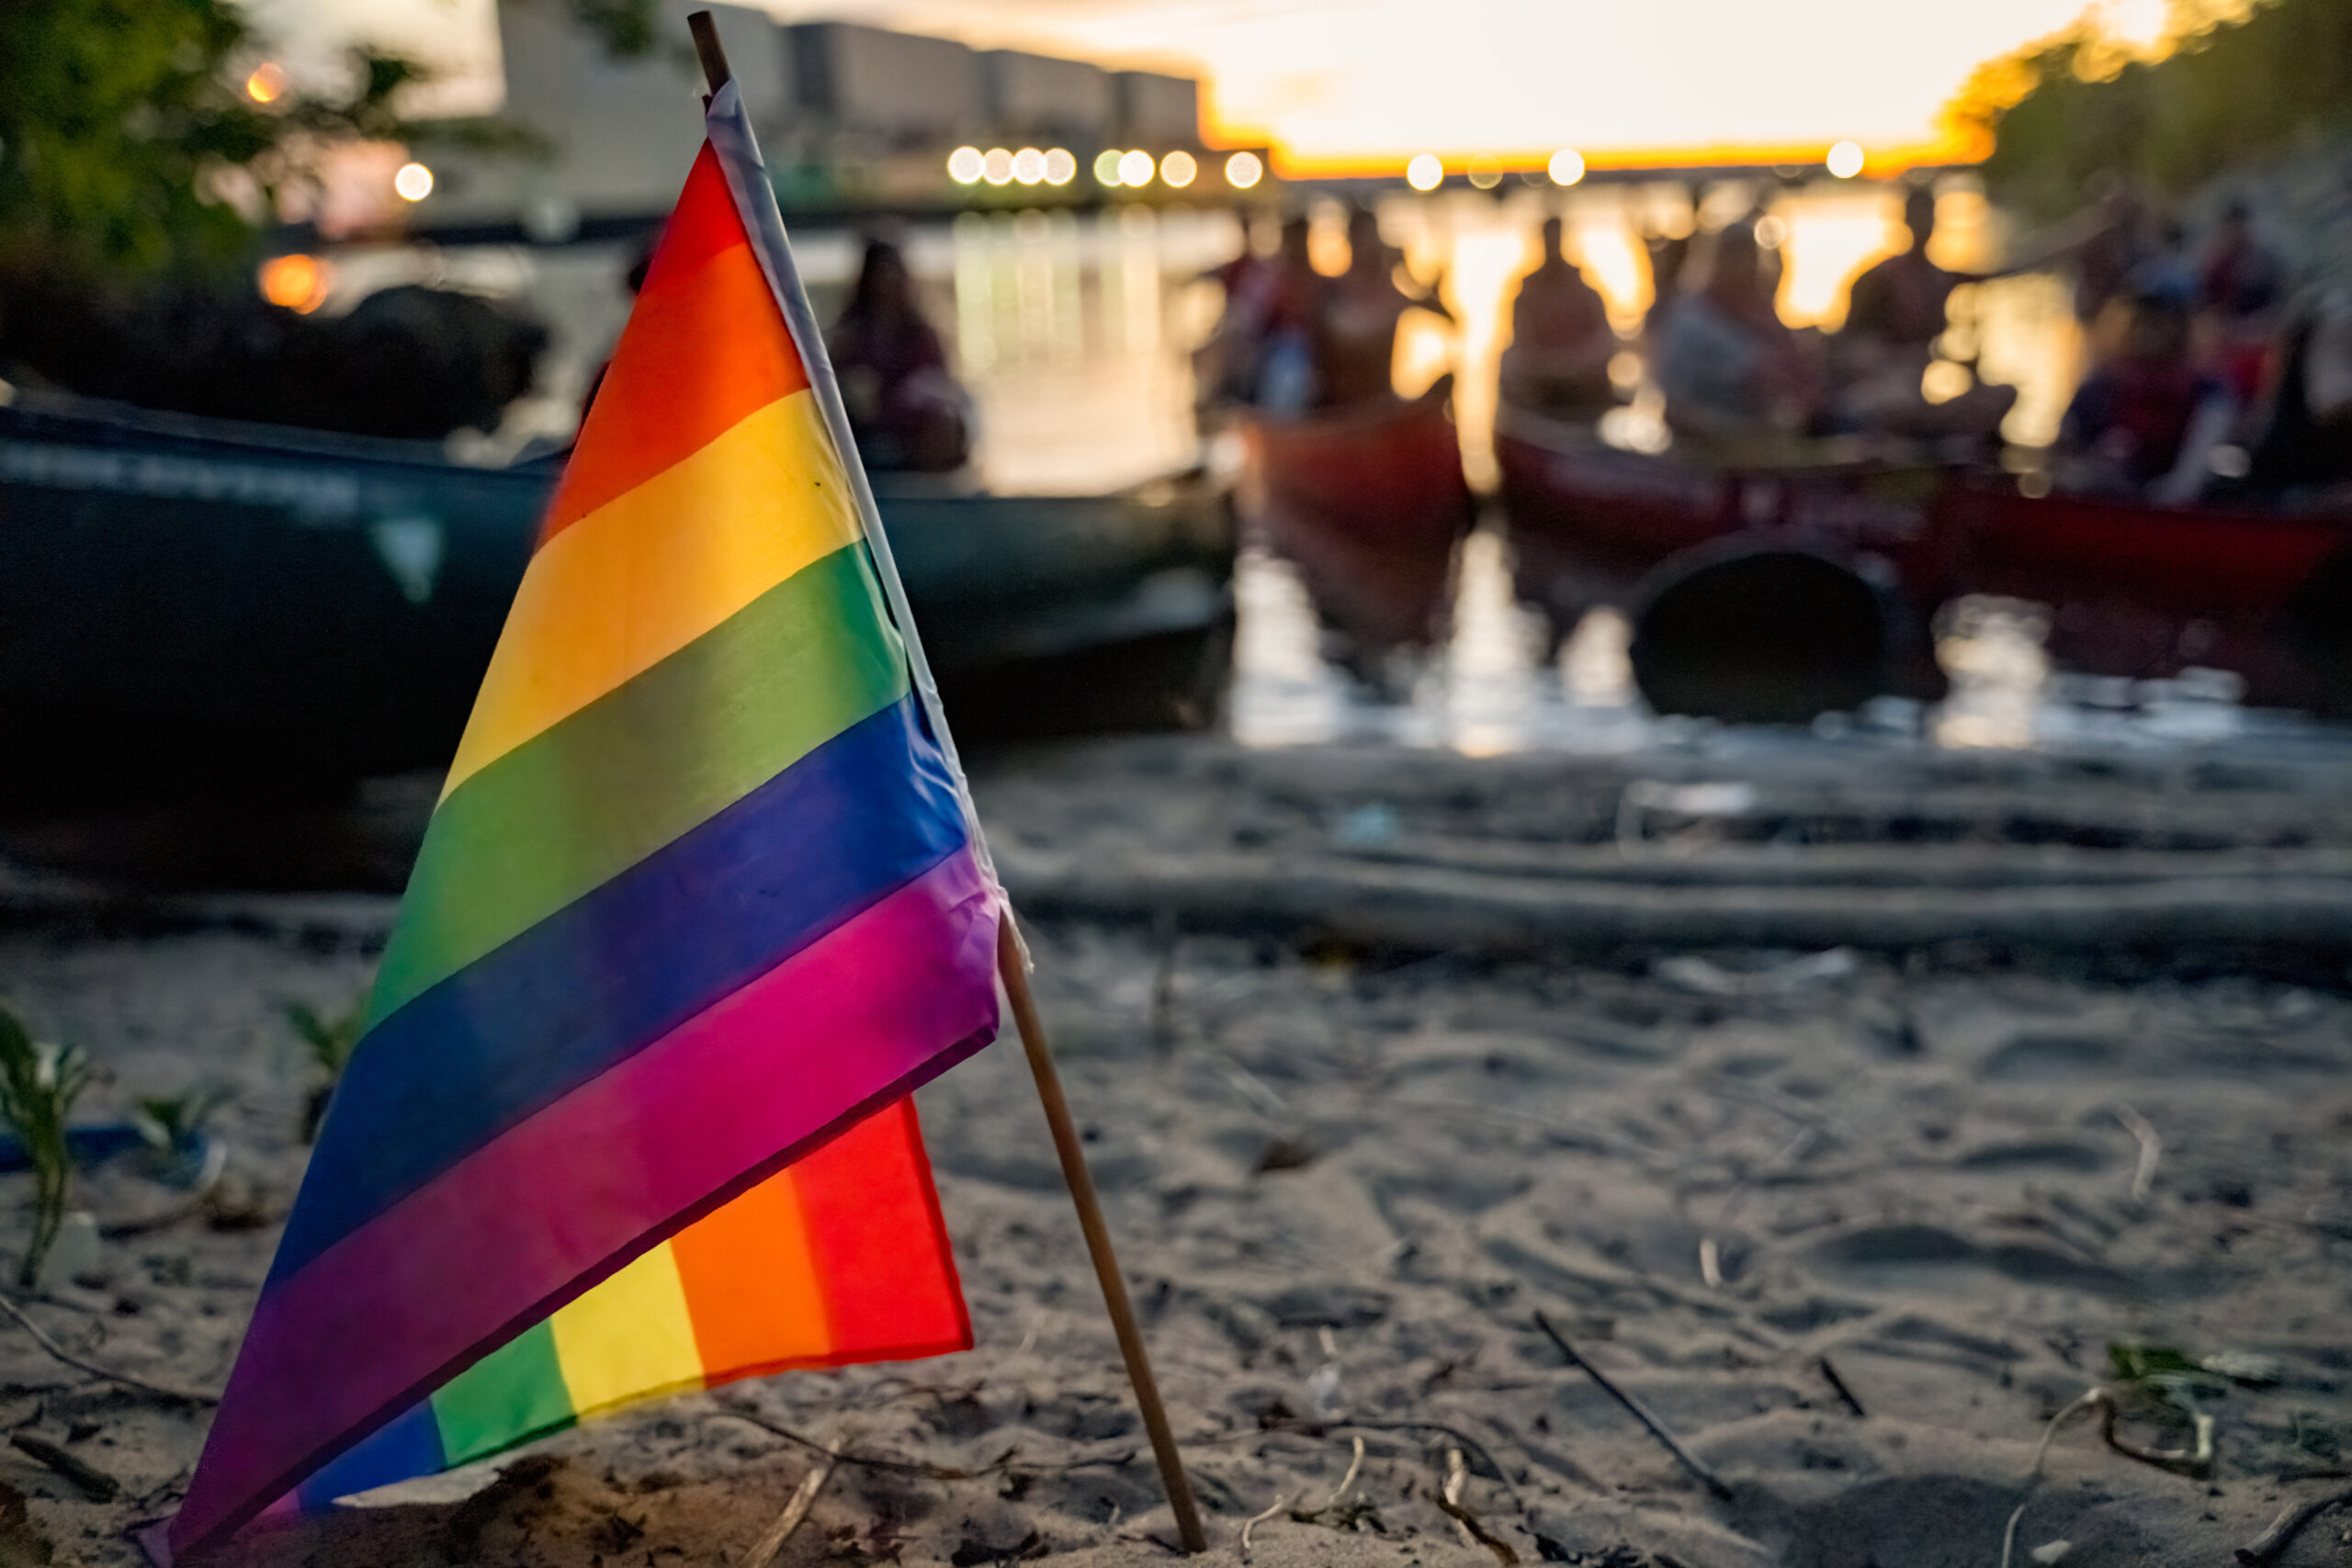 A rainbow flag stuck in the sand, canoes in the background out of focus, as the sun sets behind them.